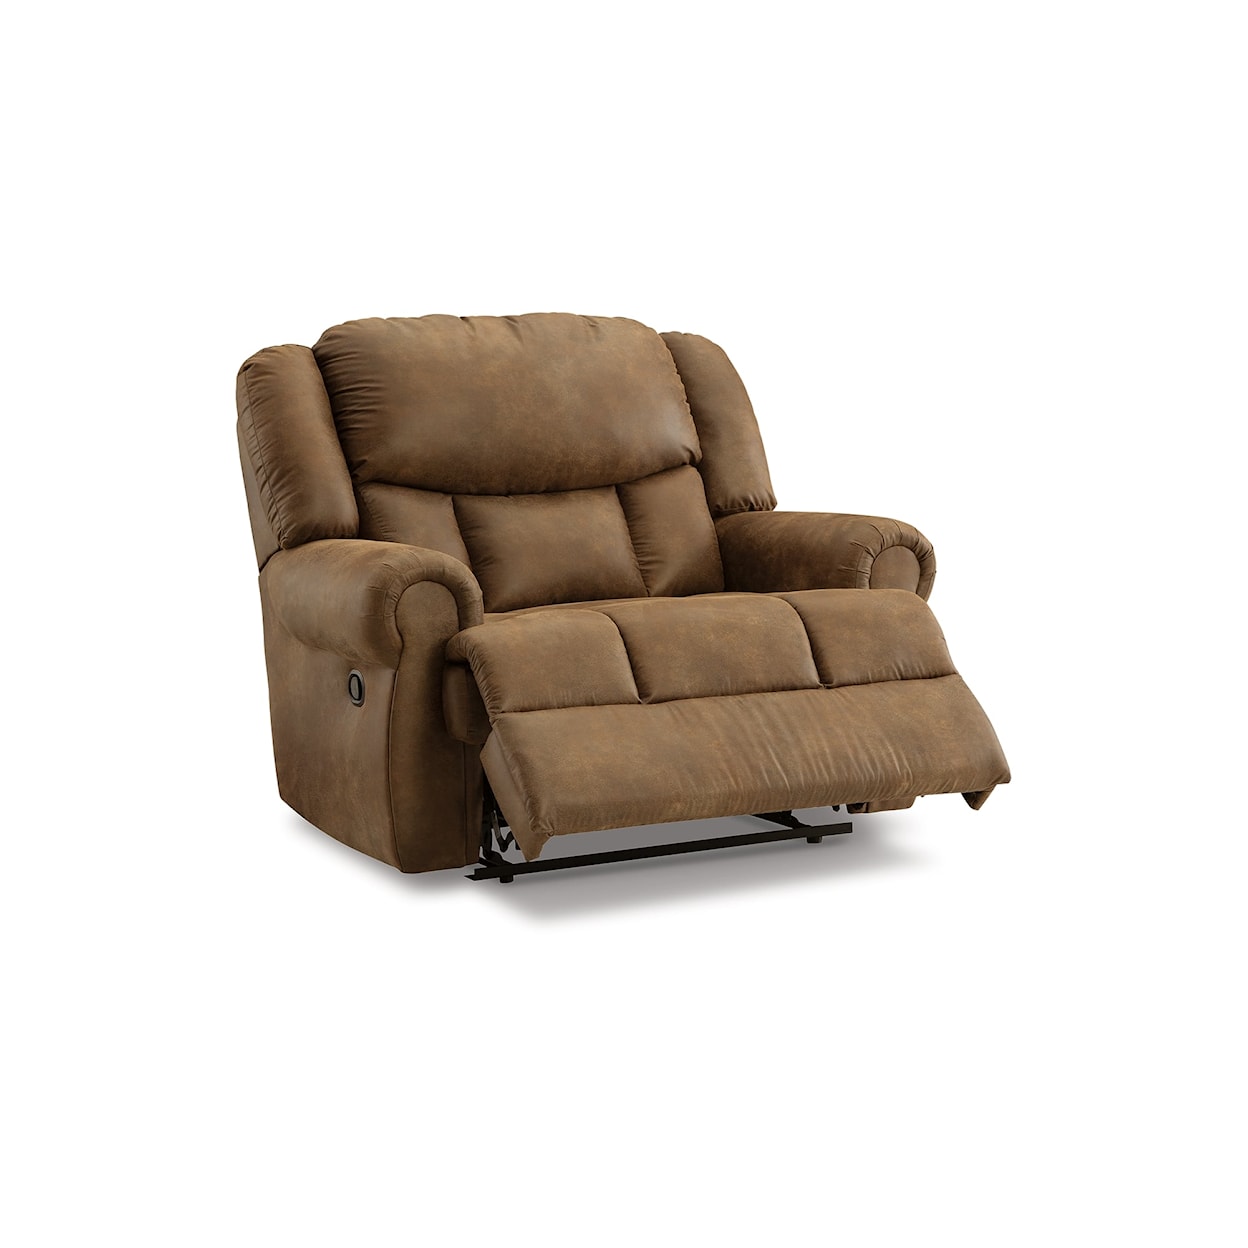 Michael Alan Select Boothbay Wide Seat Recliner